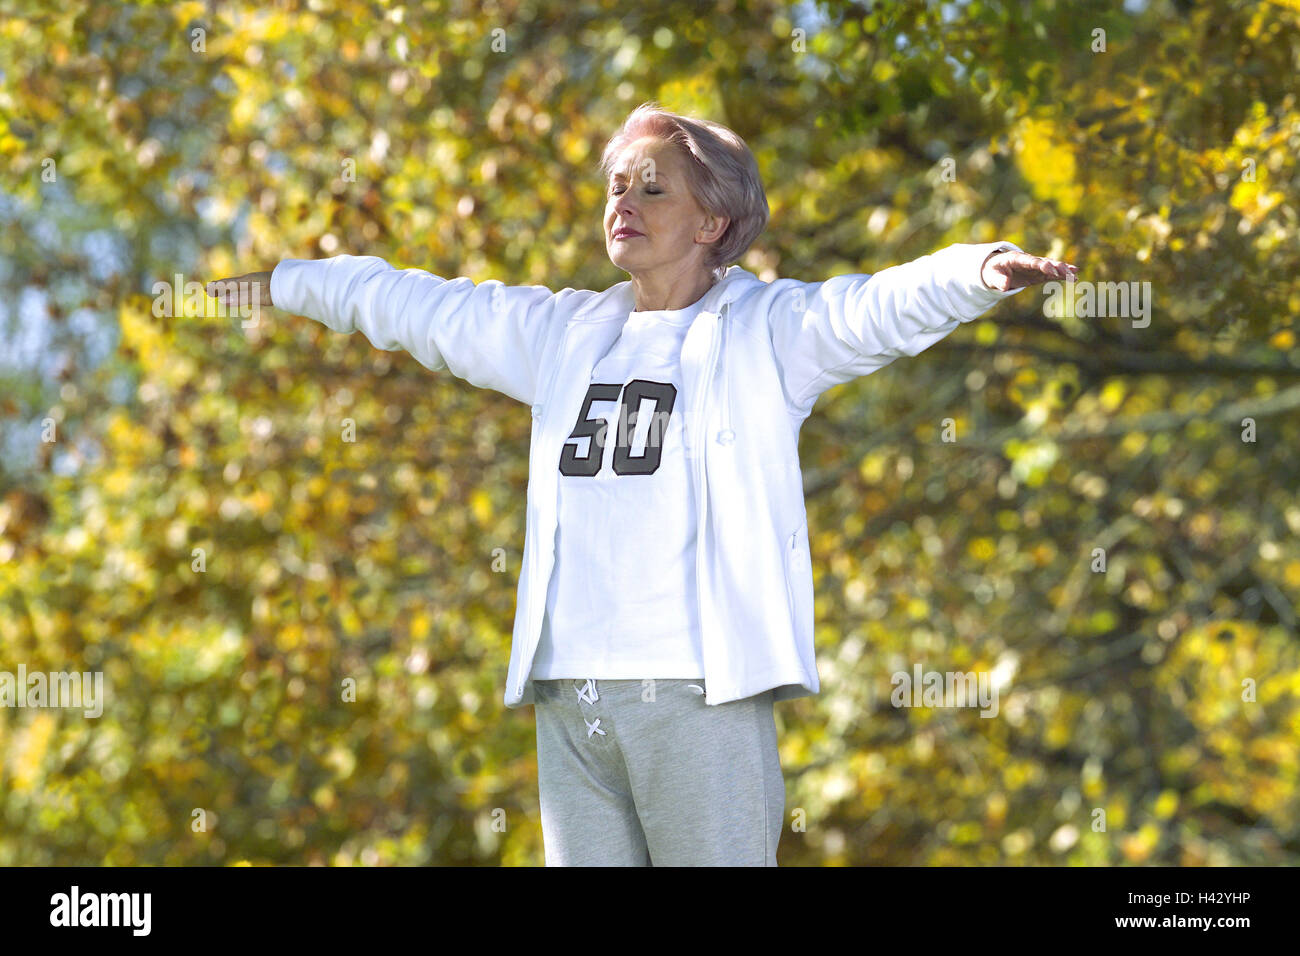 Park, senior, gymnastics exercises, detail, autumn, 55-65 years, woman, Best Agers, gymnastics, gymnastic, motion, arms stretch, eyes closed, recreation, rest, concentration, sportily, sport, fitness, health, activity, conscious body, conscious health, sp Stock Photo